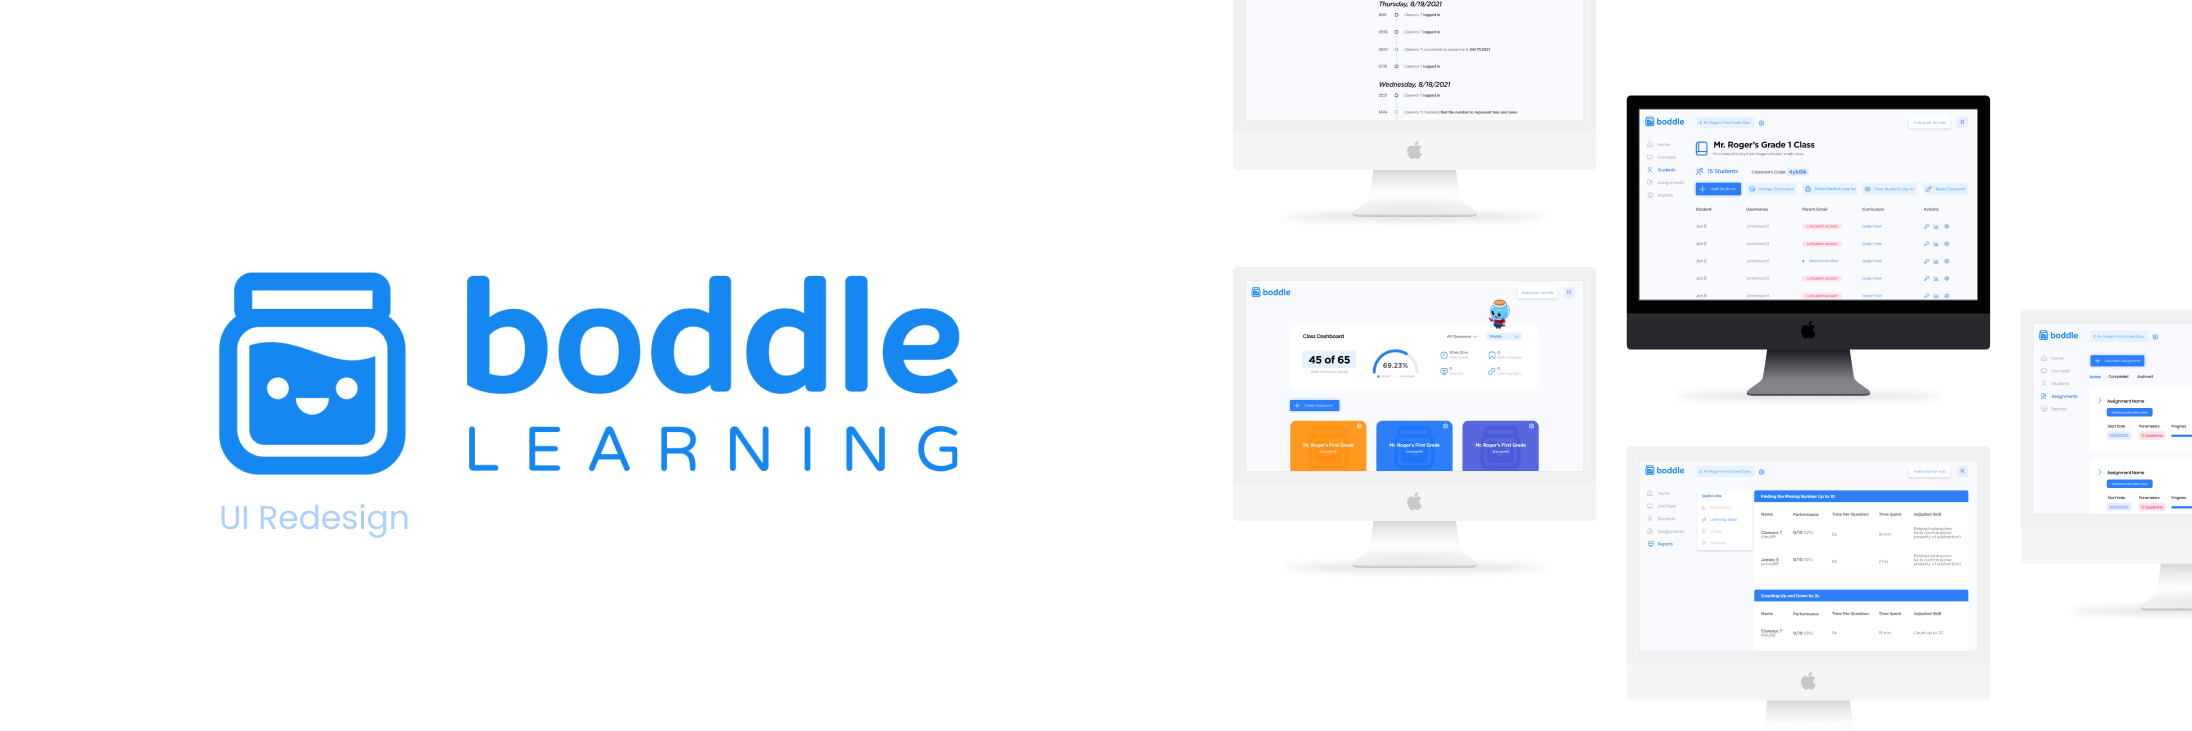 Boddle Learning Banner